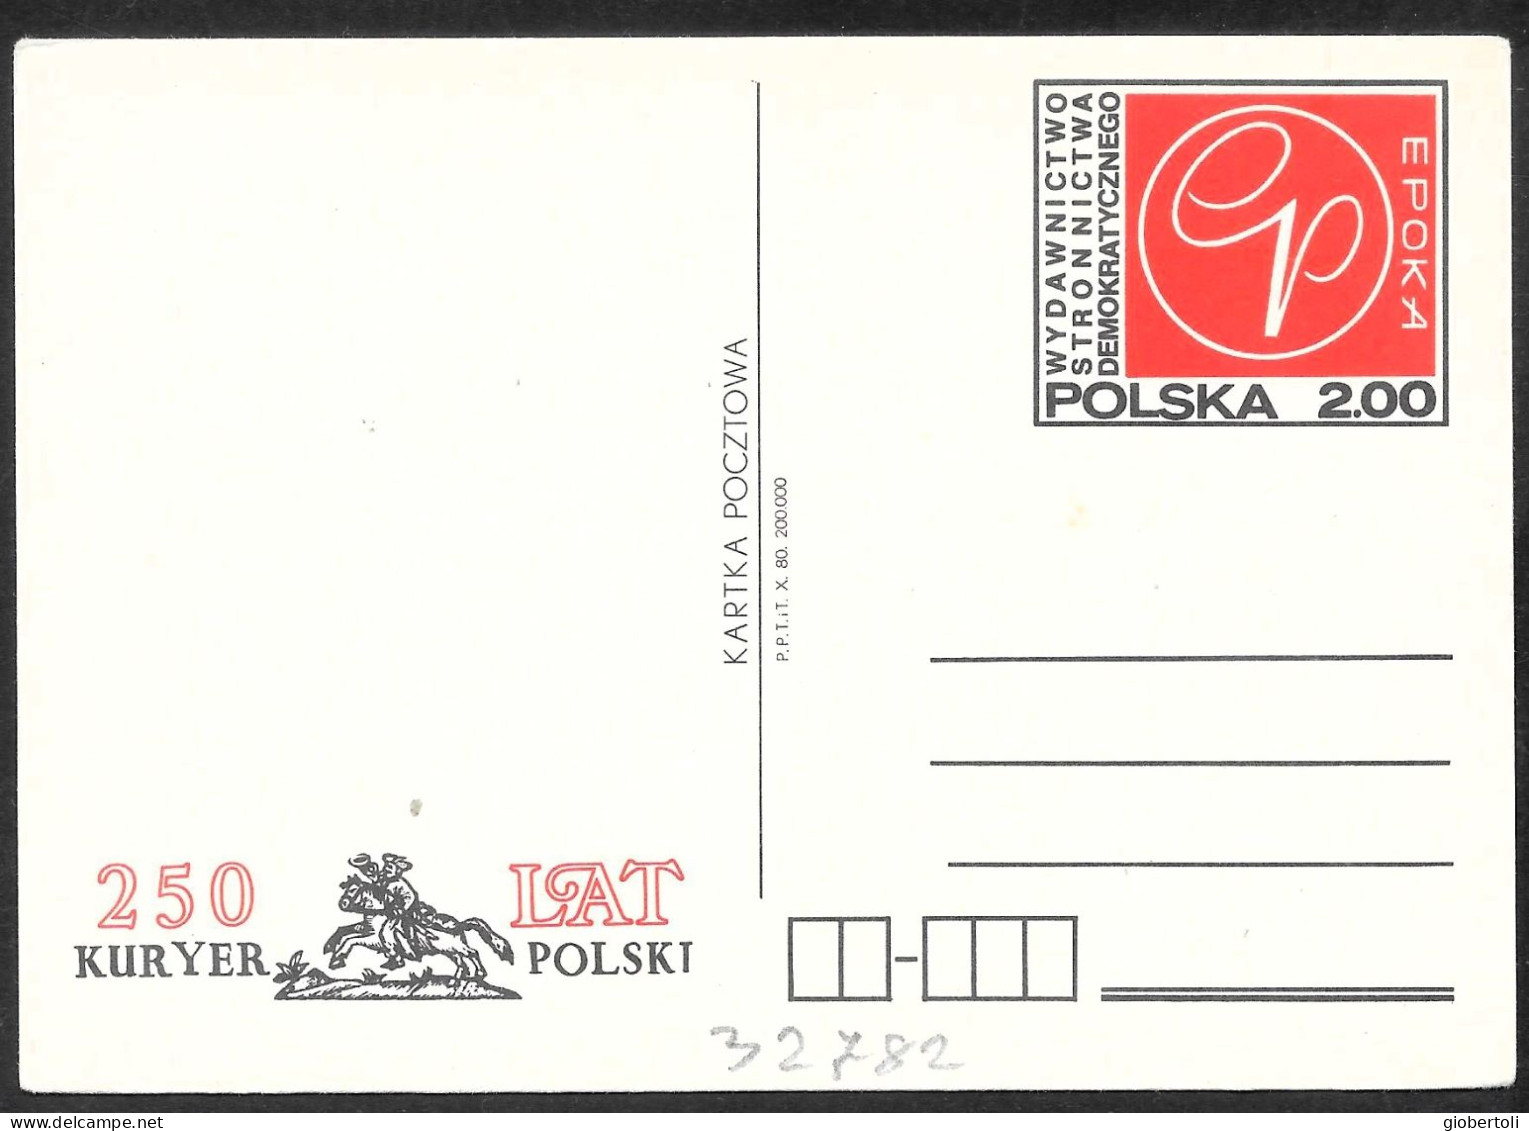 Polonia/Poland/Pologne: Intero, Stationery, Entier, Casa Editrice, Publishing House, Maison D'édition - Factories & Industries